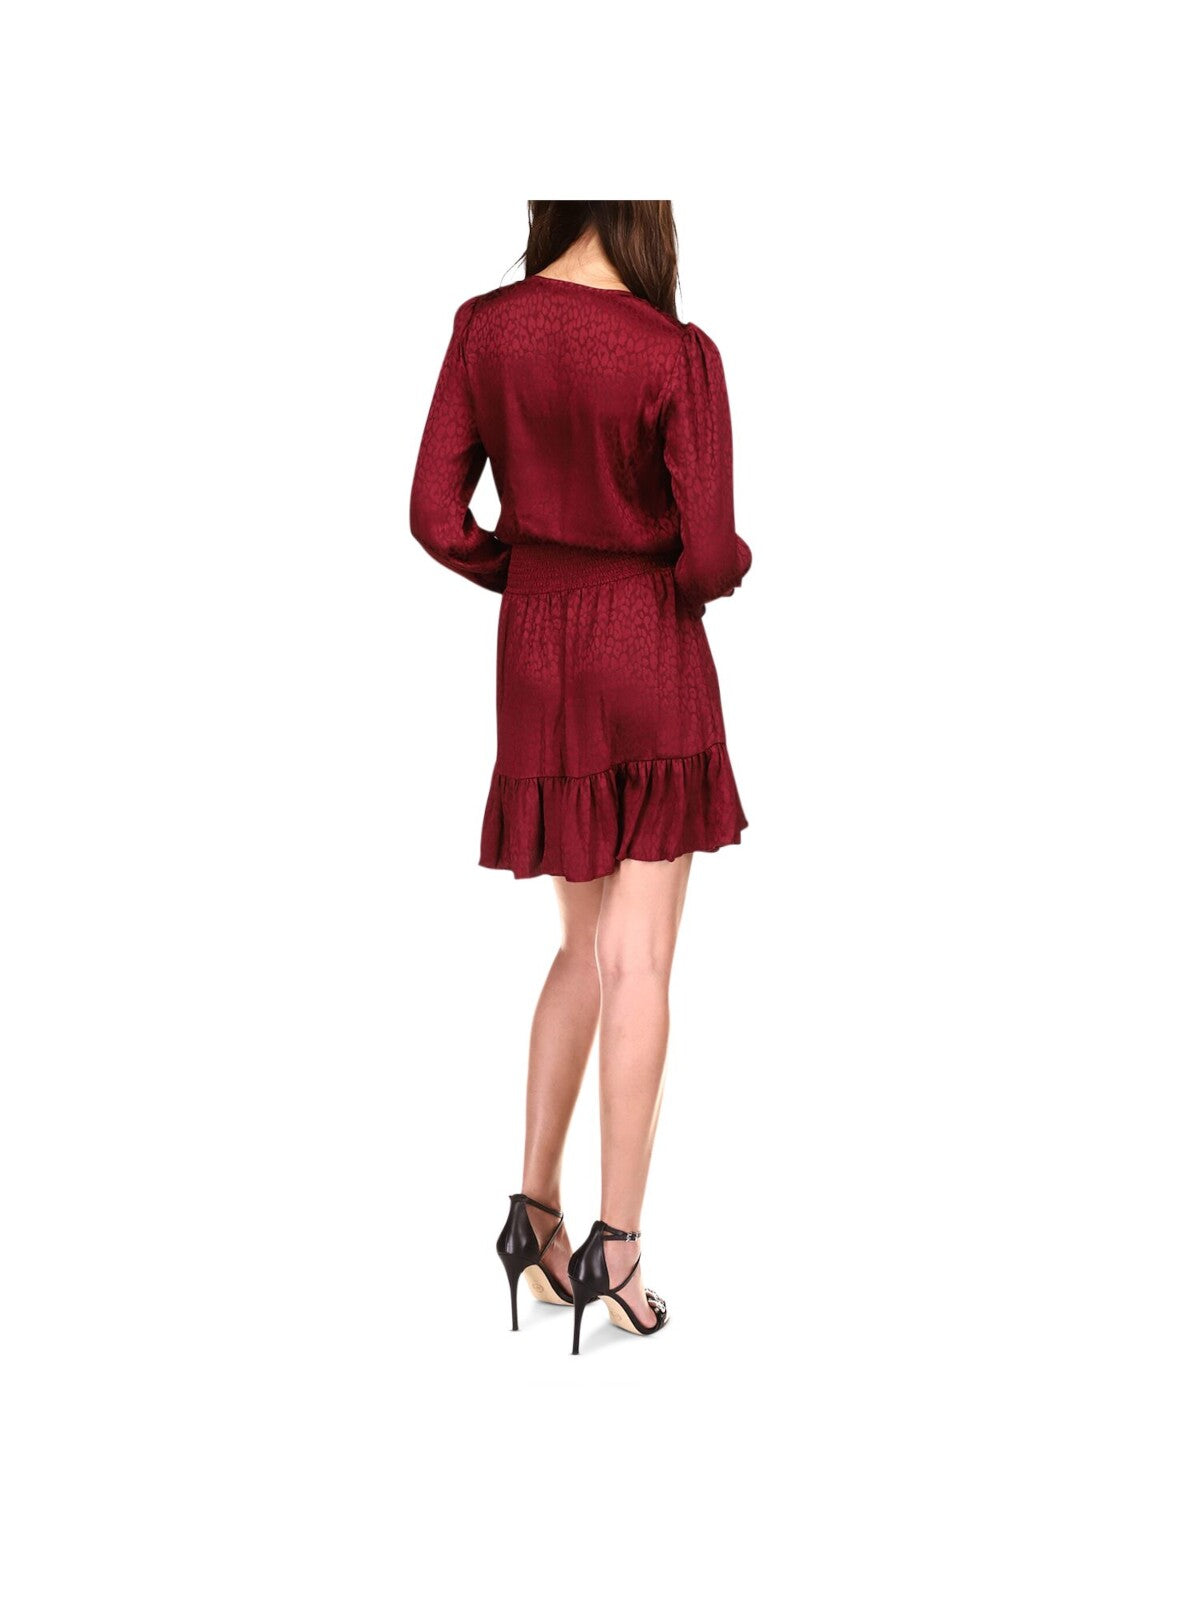 MICHAEL MICHAEL KORS Womens Burgundy Smocked Ruffled Cuffed Pull-on Style Long Sleeve V Neck Above The Knee Cocktail Faux Wrap Dress XL